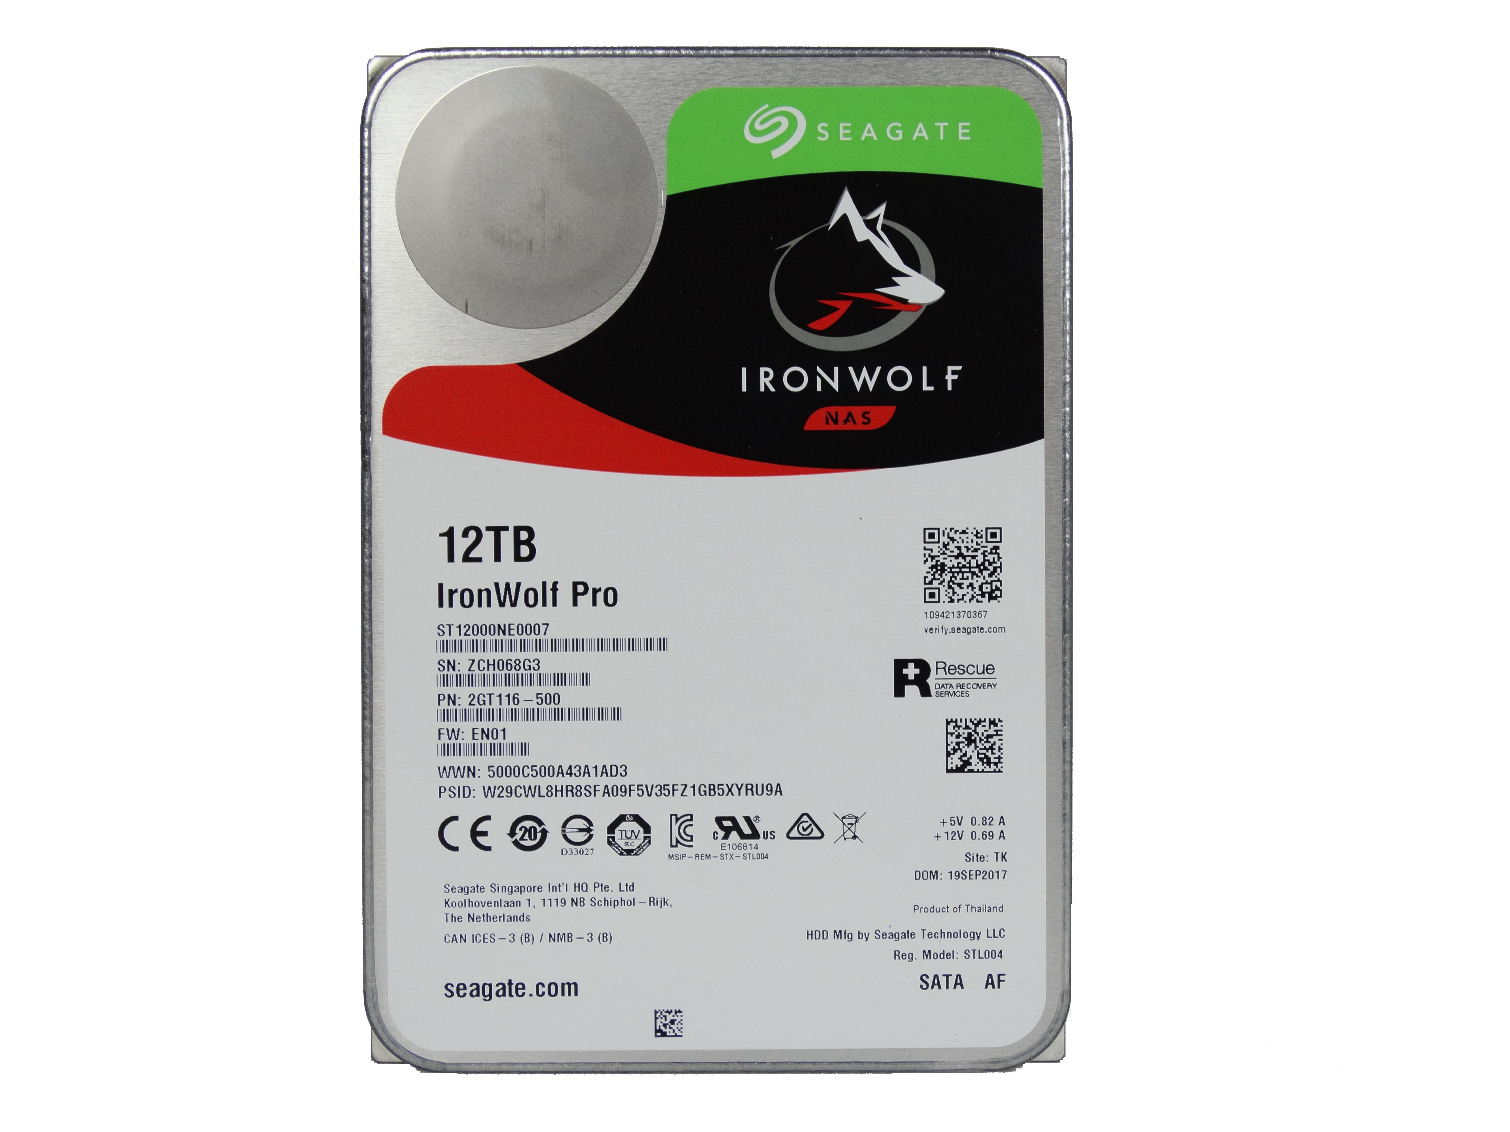 Seagate IronWolf Pro 12TB HDD Review - Tom's Hardware | Tom's Hardware